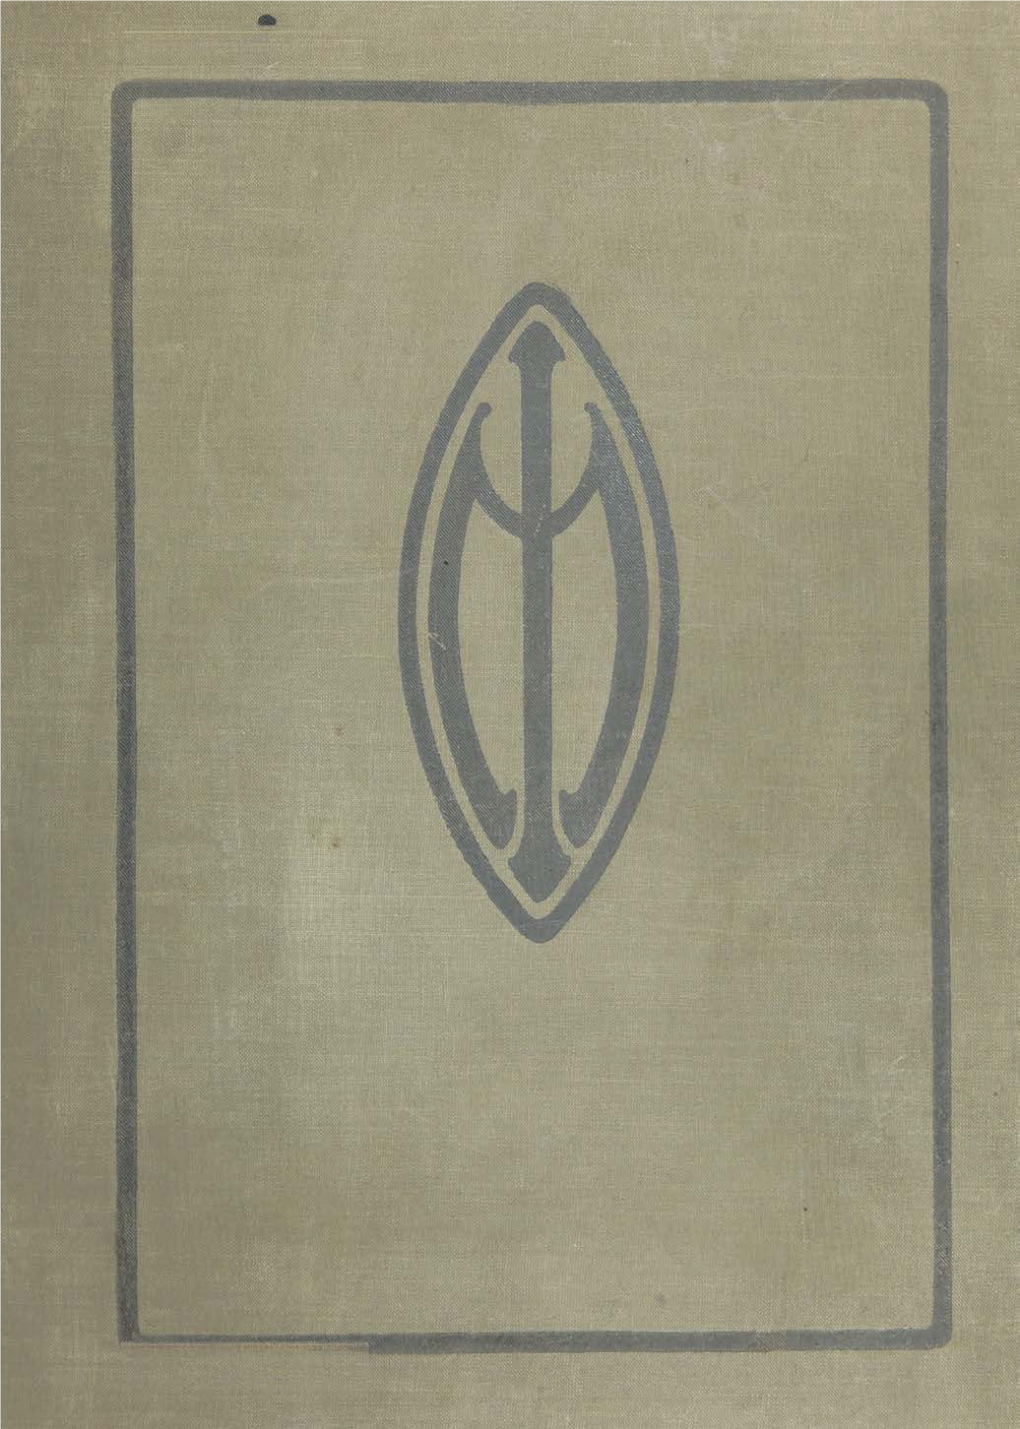 1912 Yearbook